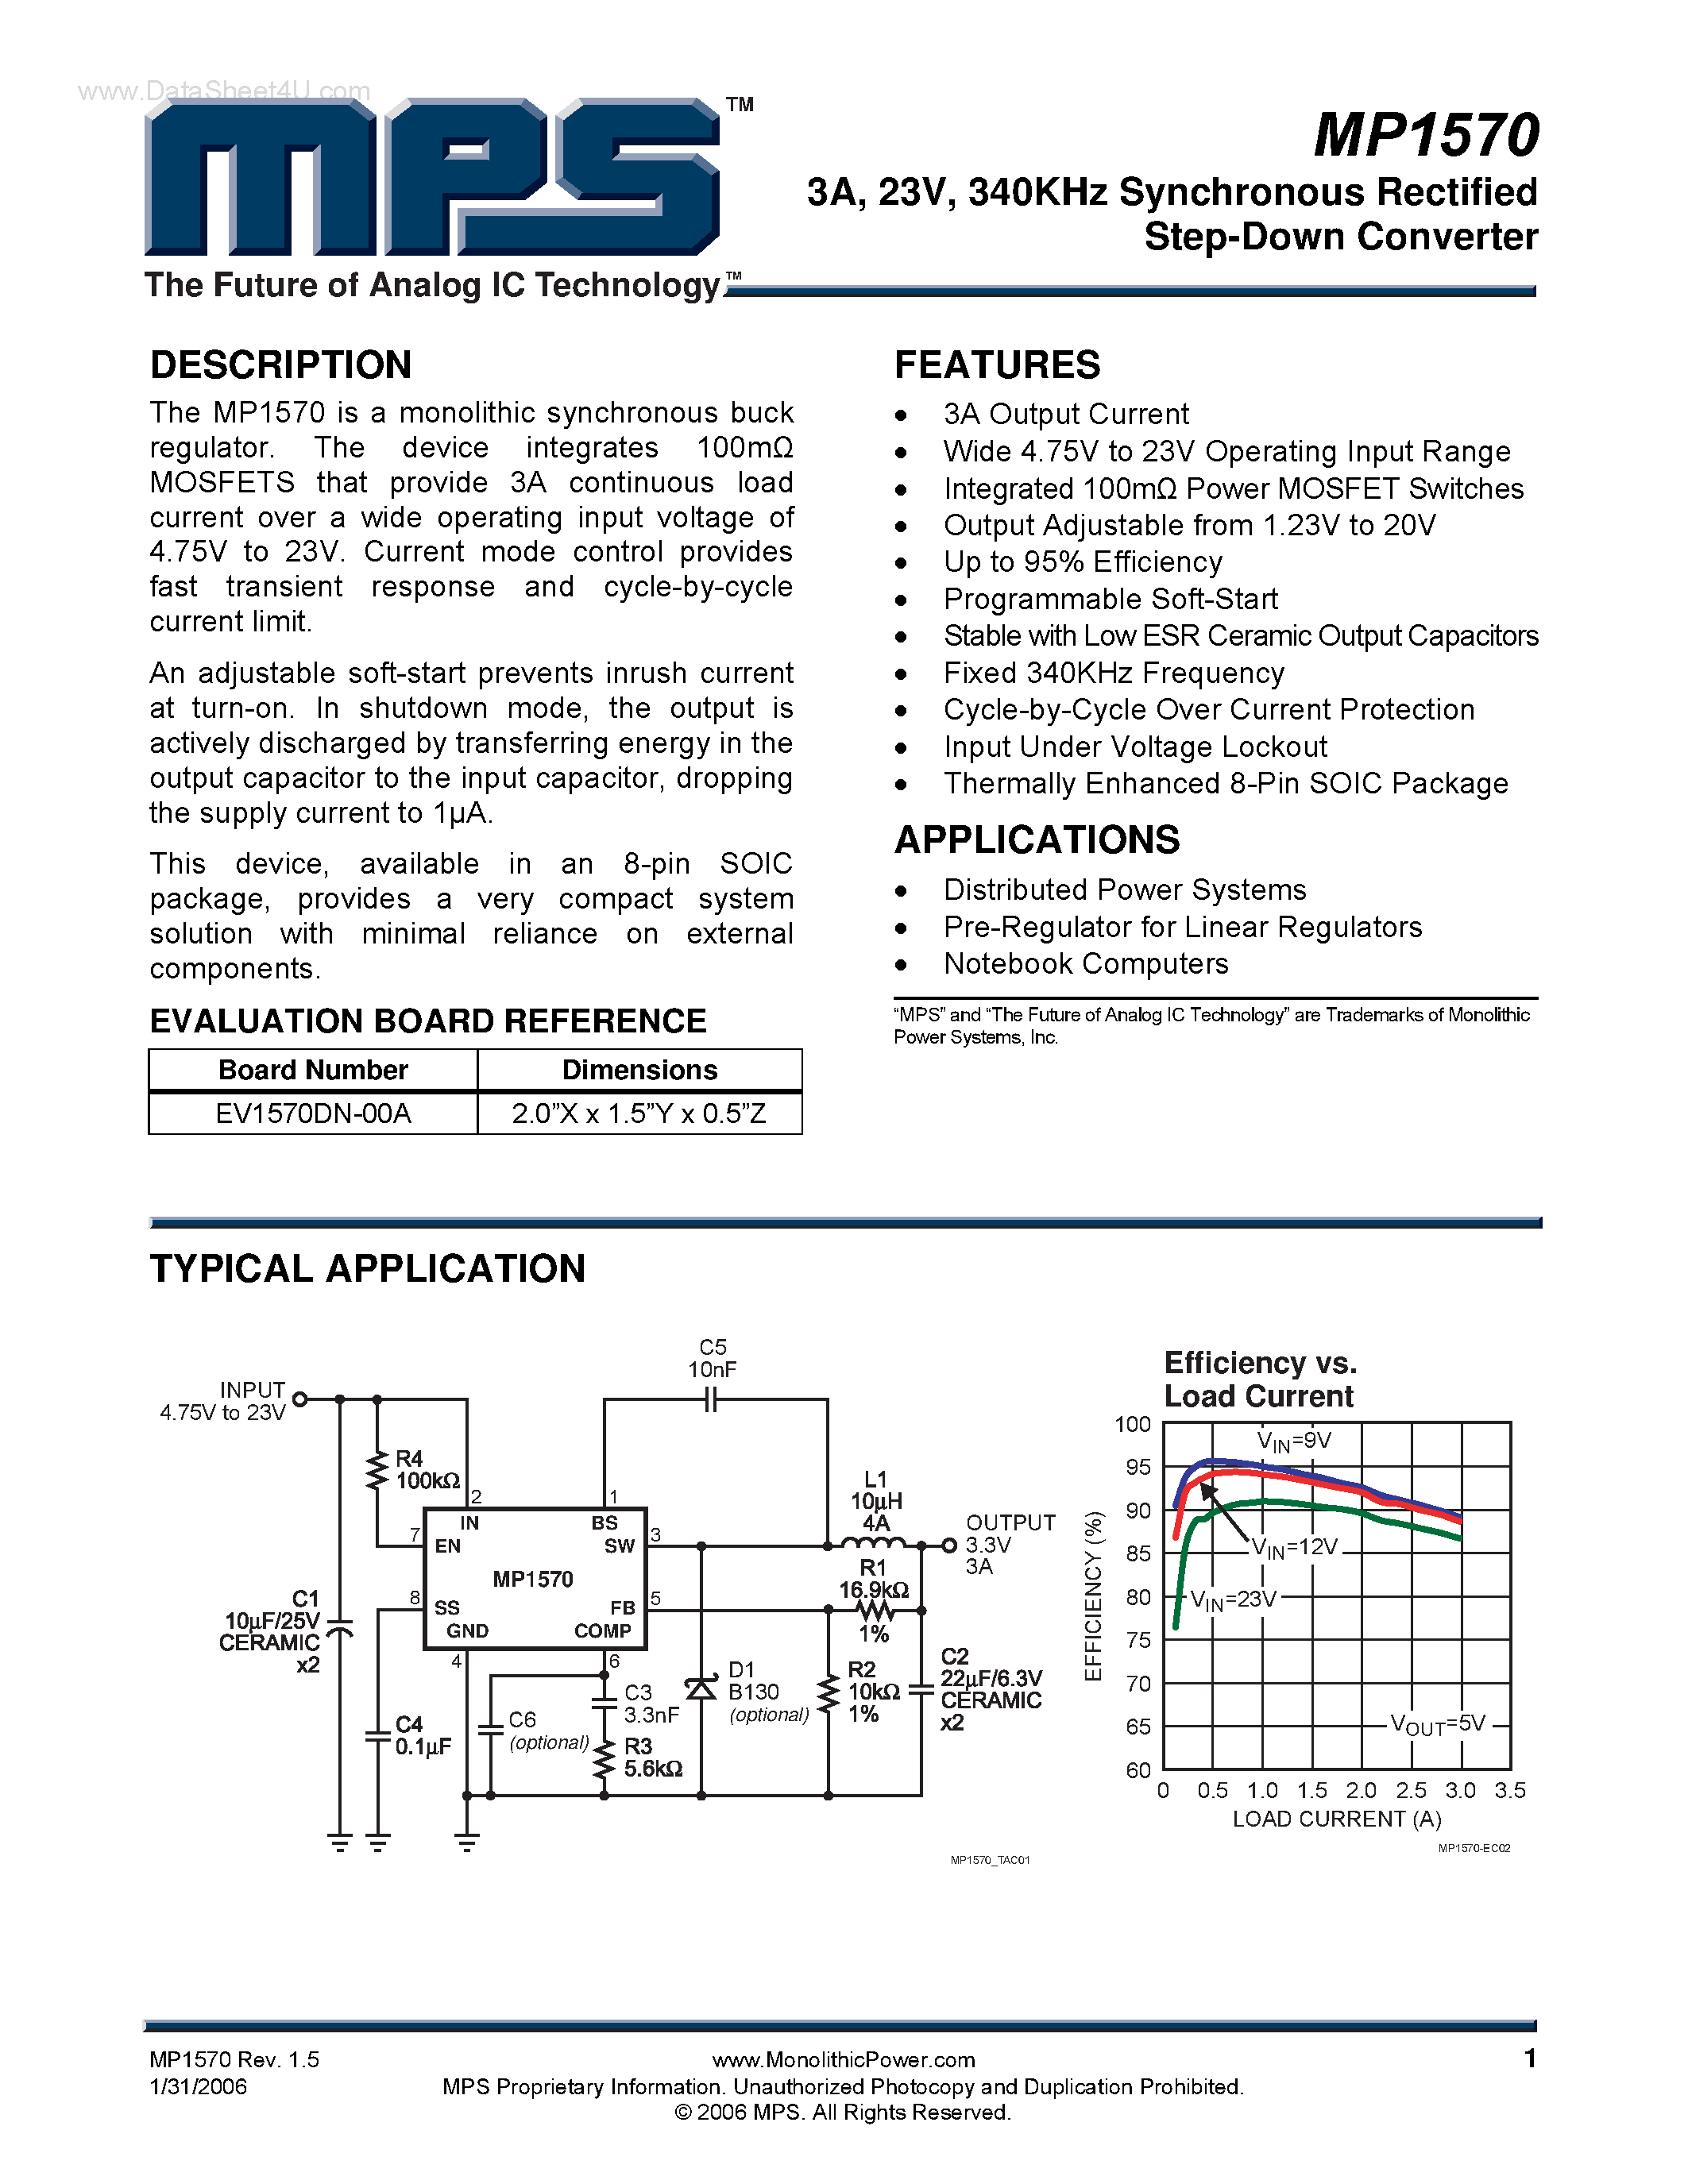 Datasheet MP1570 - 340KHz Synchronous Rectified Step-Down Converter page 1